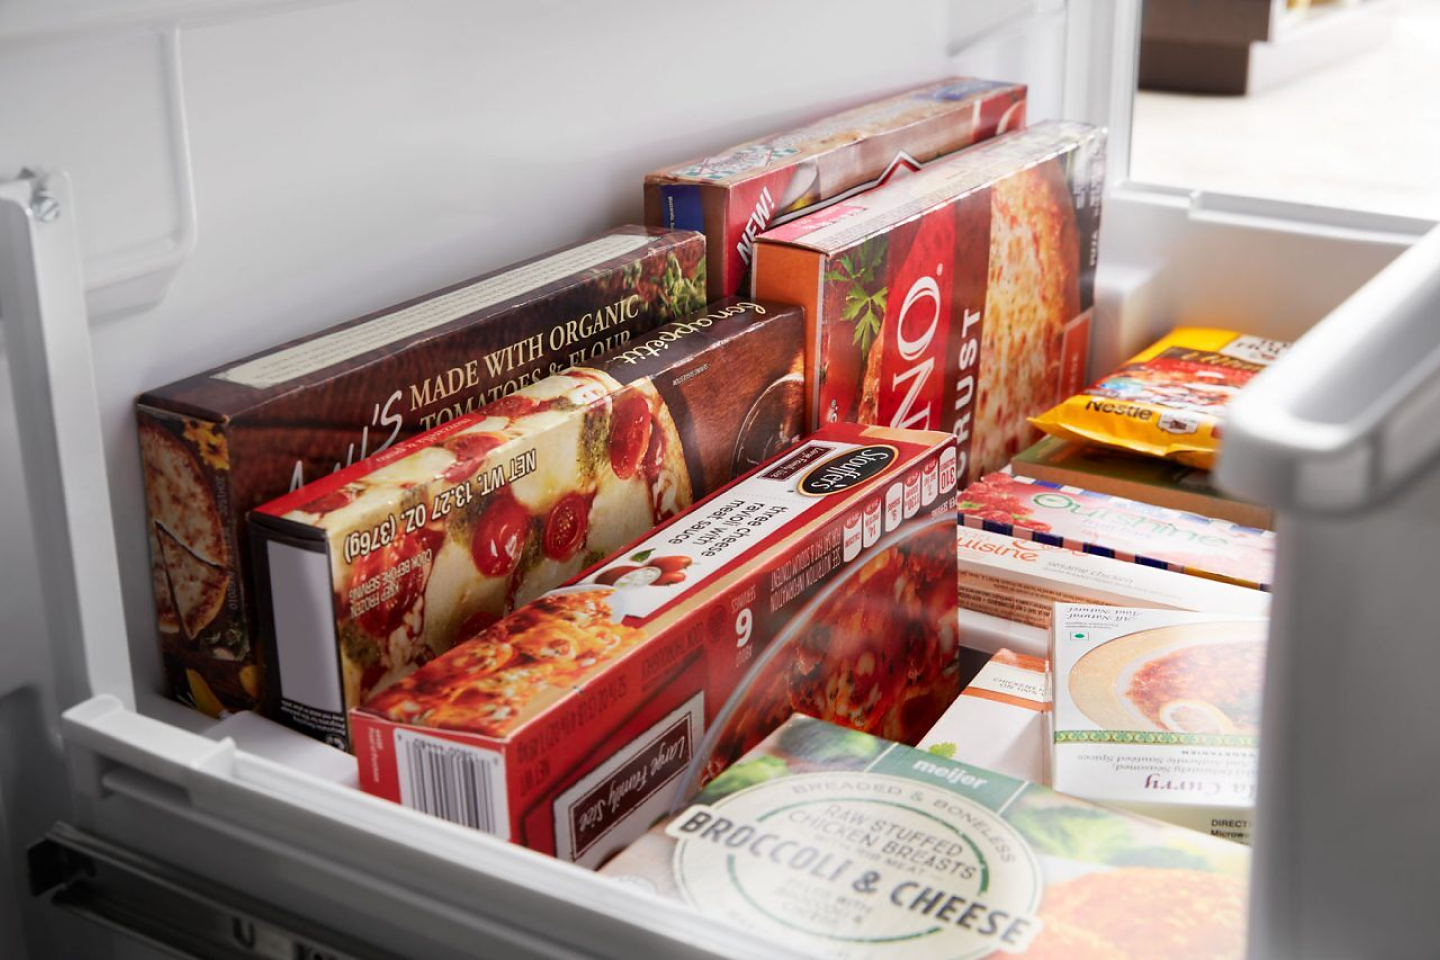 Close-up of frozen pizzas and other foods in an open bottom freezer